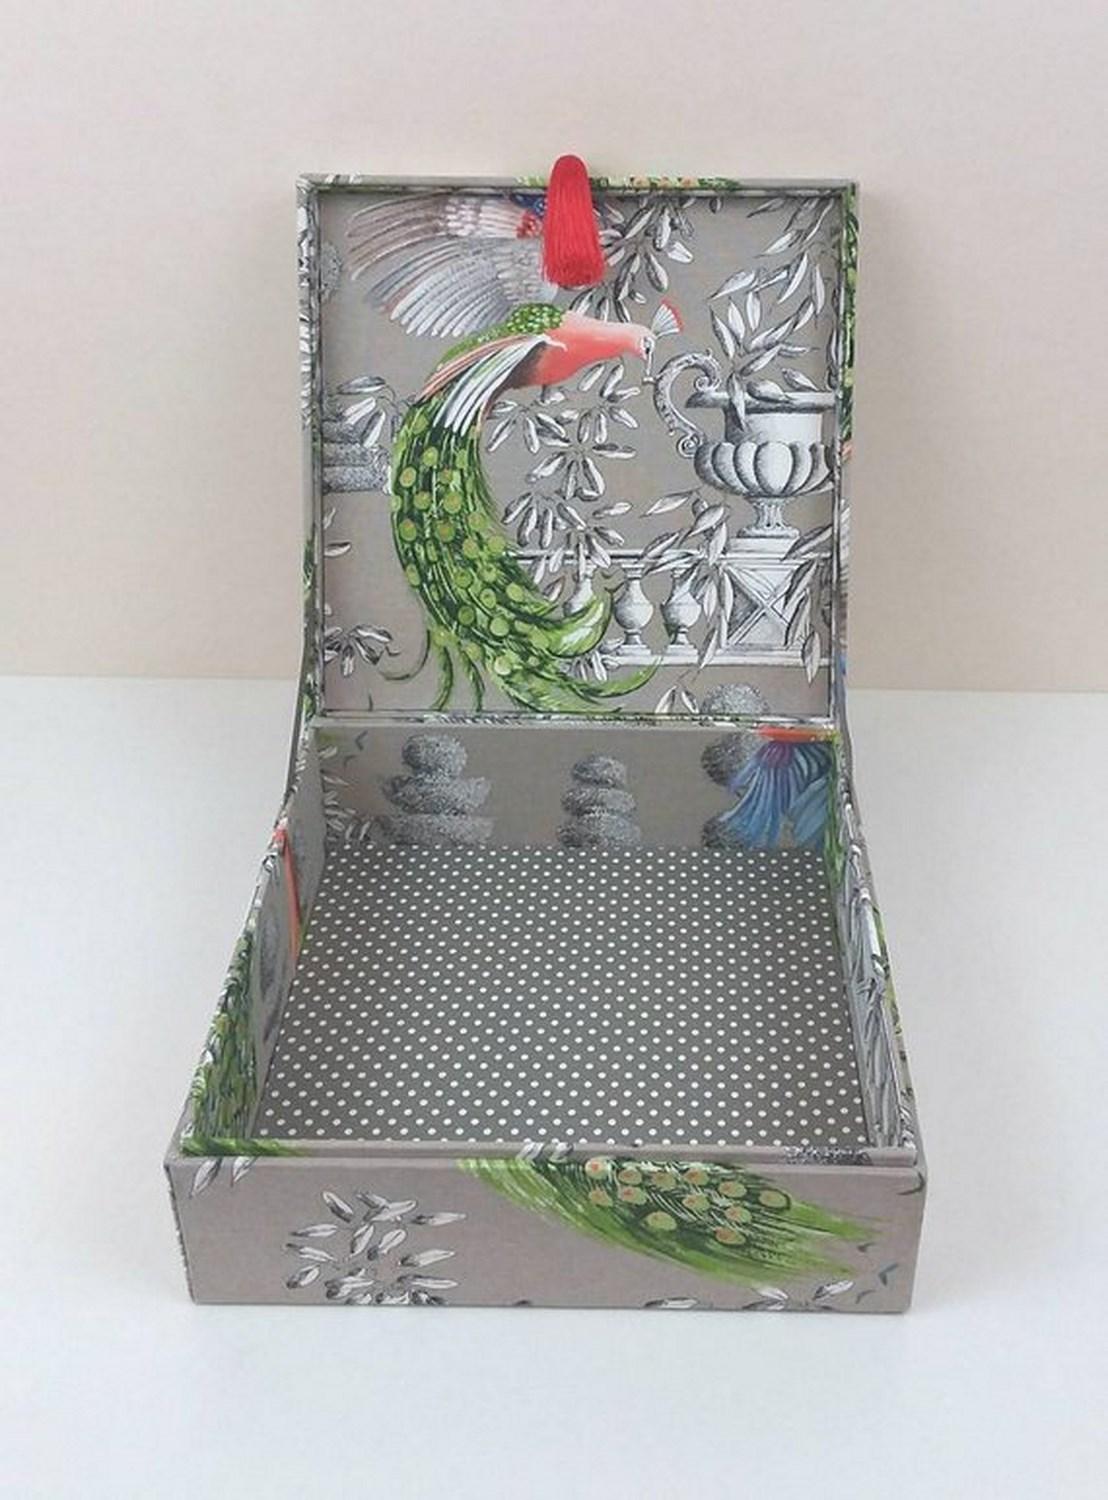 Women's or Men's Birds Printed Fabric Decorative Storage Box for Scarves Handmade in France